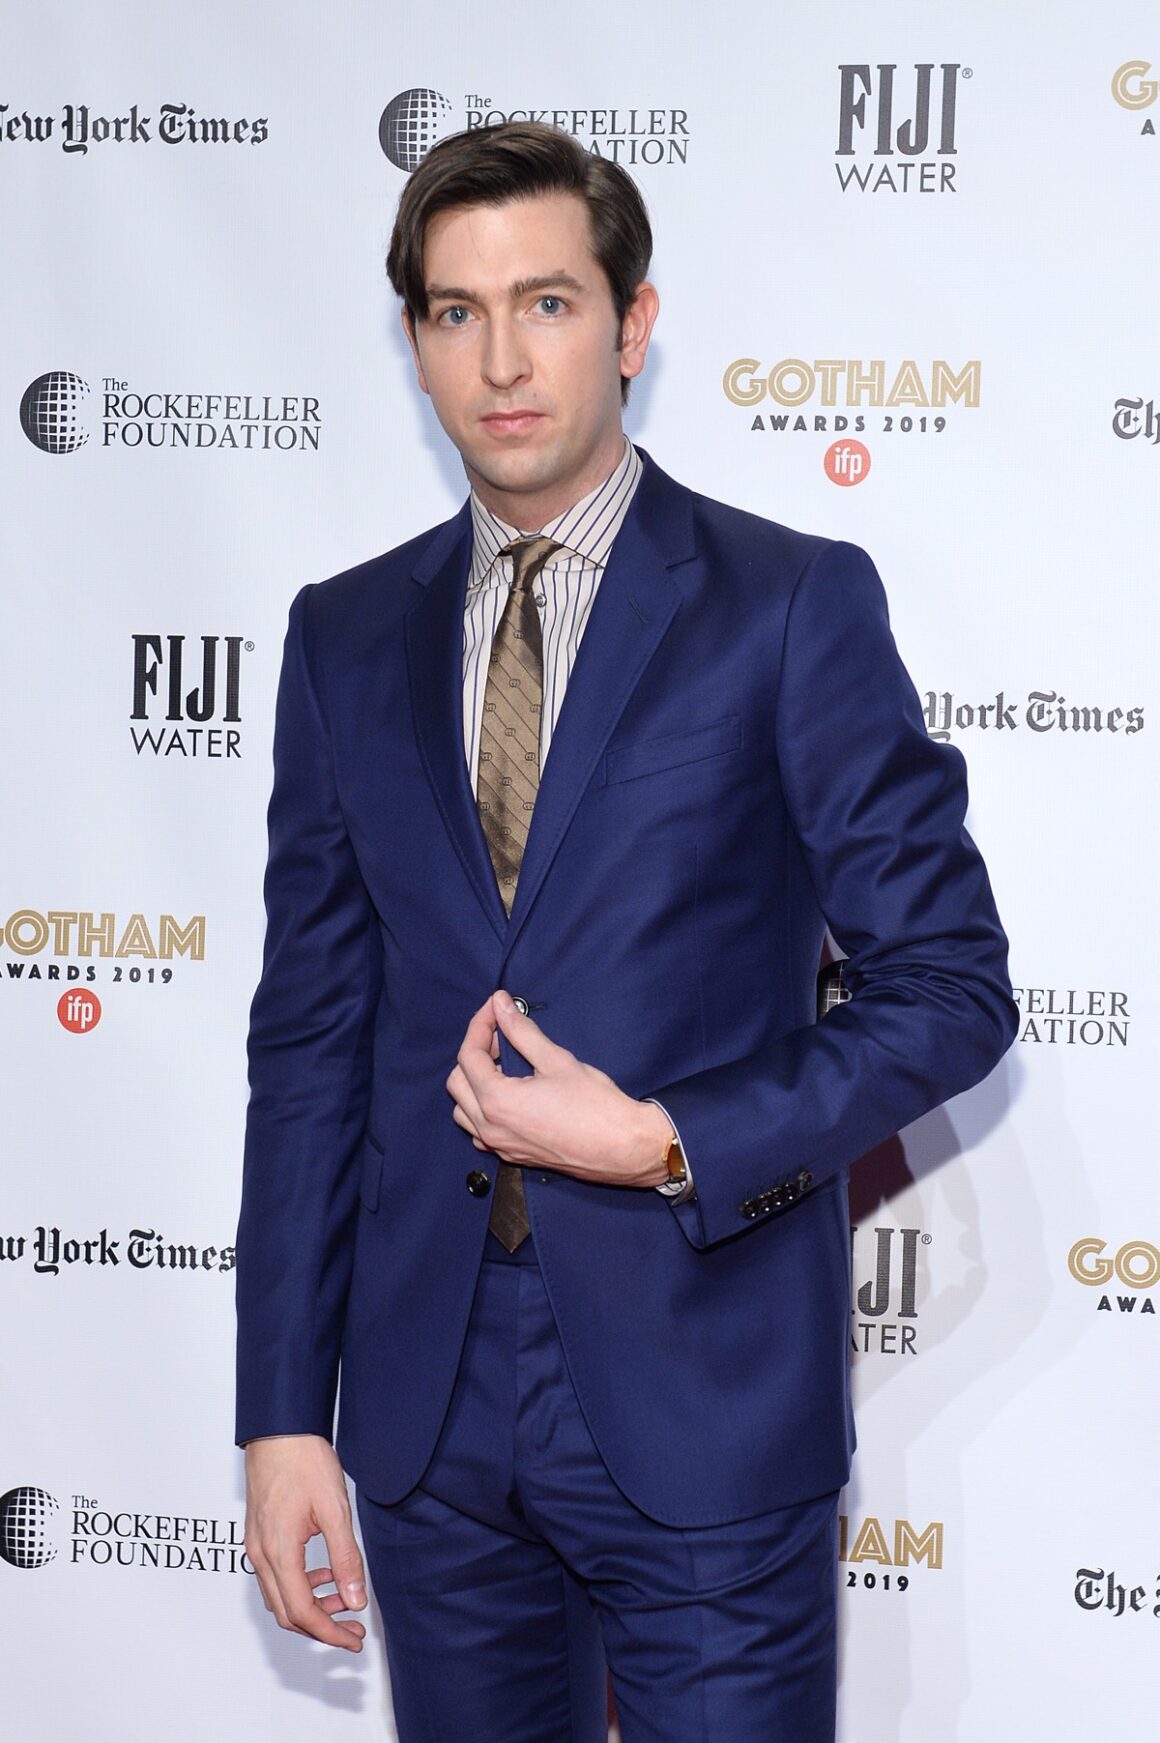 A Fan Requested That Succession Star Nicholas Braun ‘Hit Them With My ...